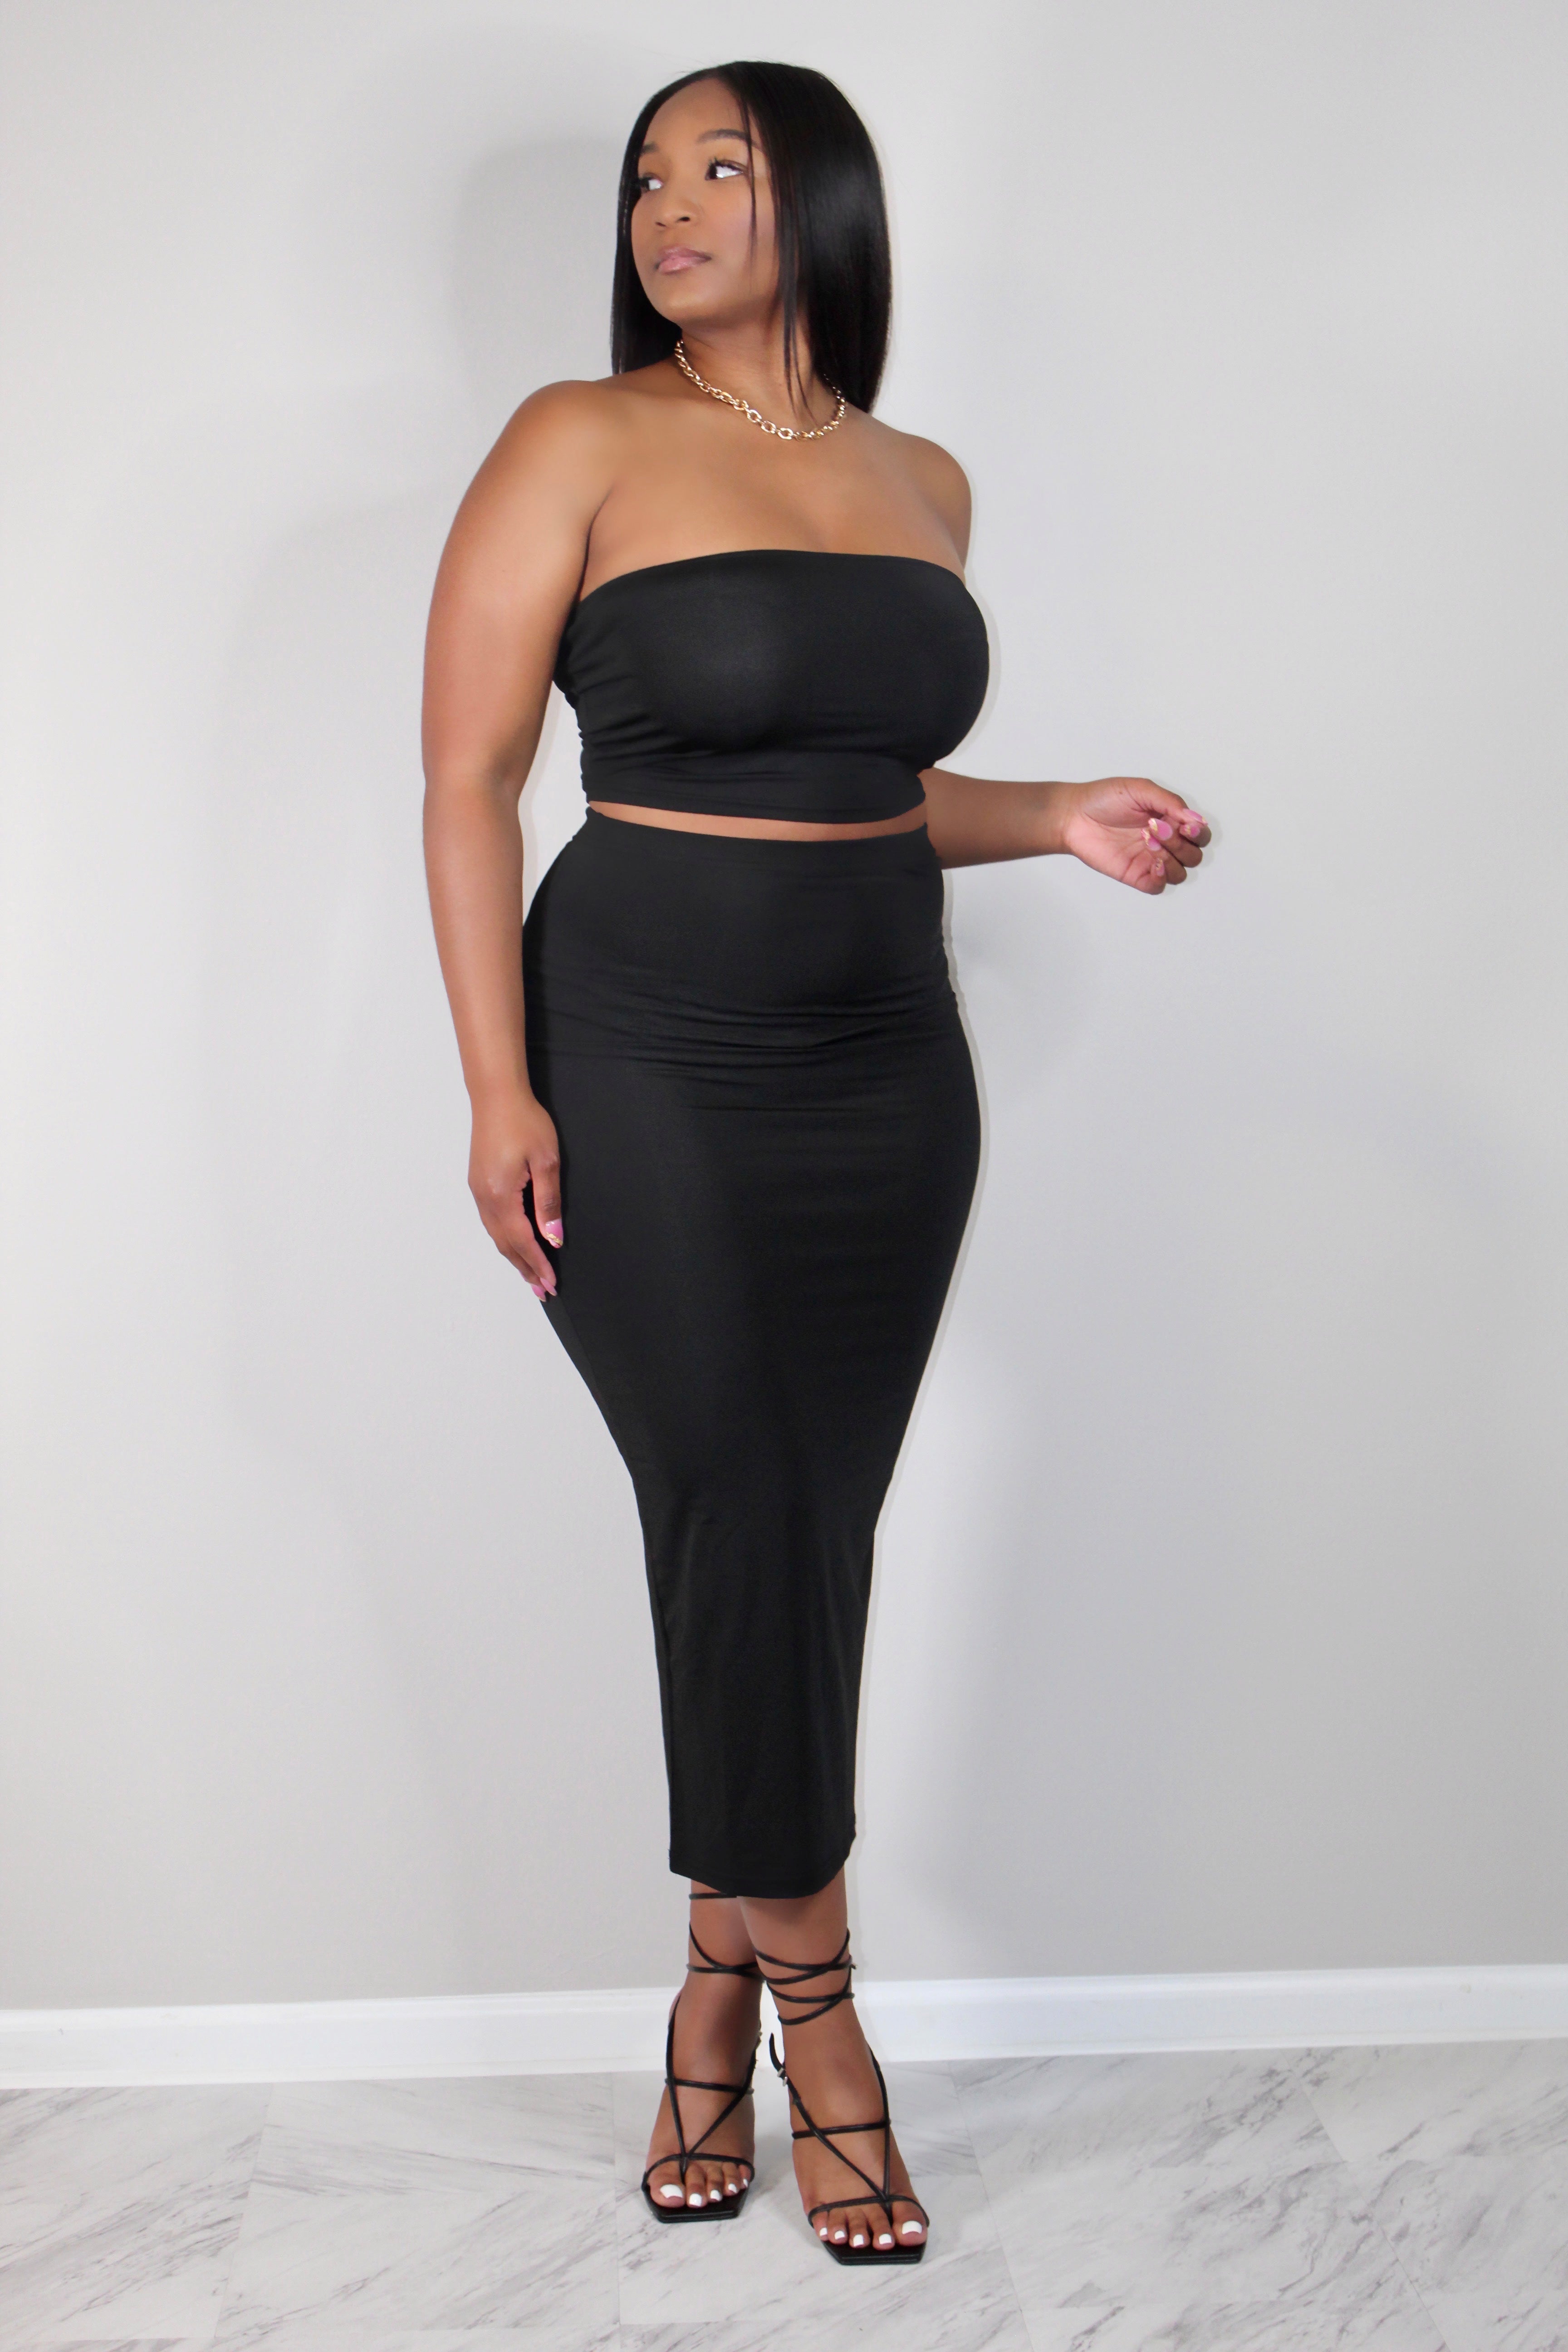 Two Piece Dress & Two Piece Skirt and Top - Women's - Black